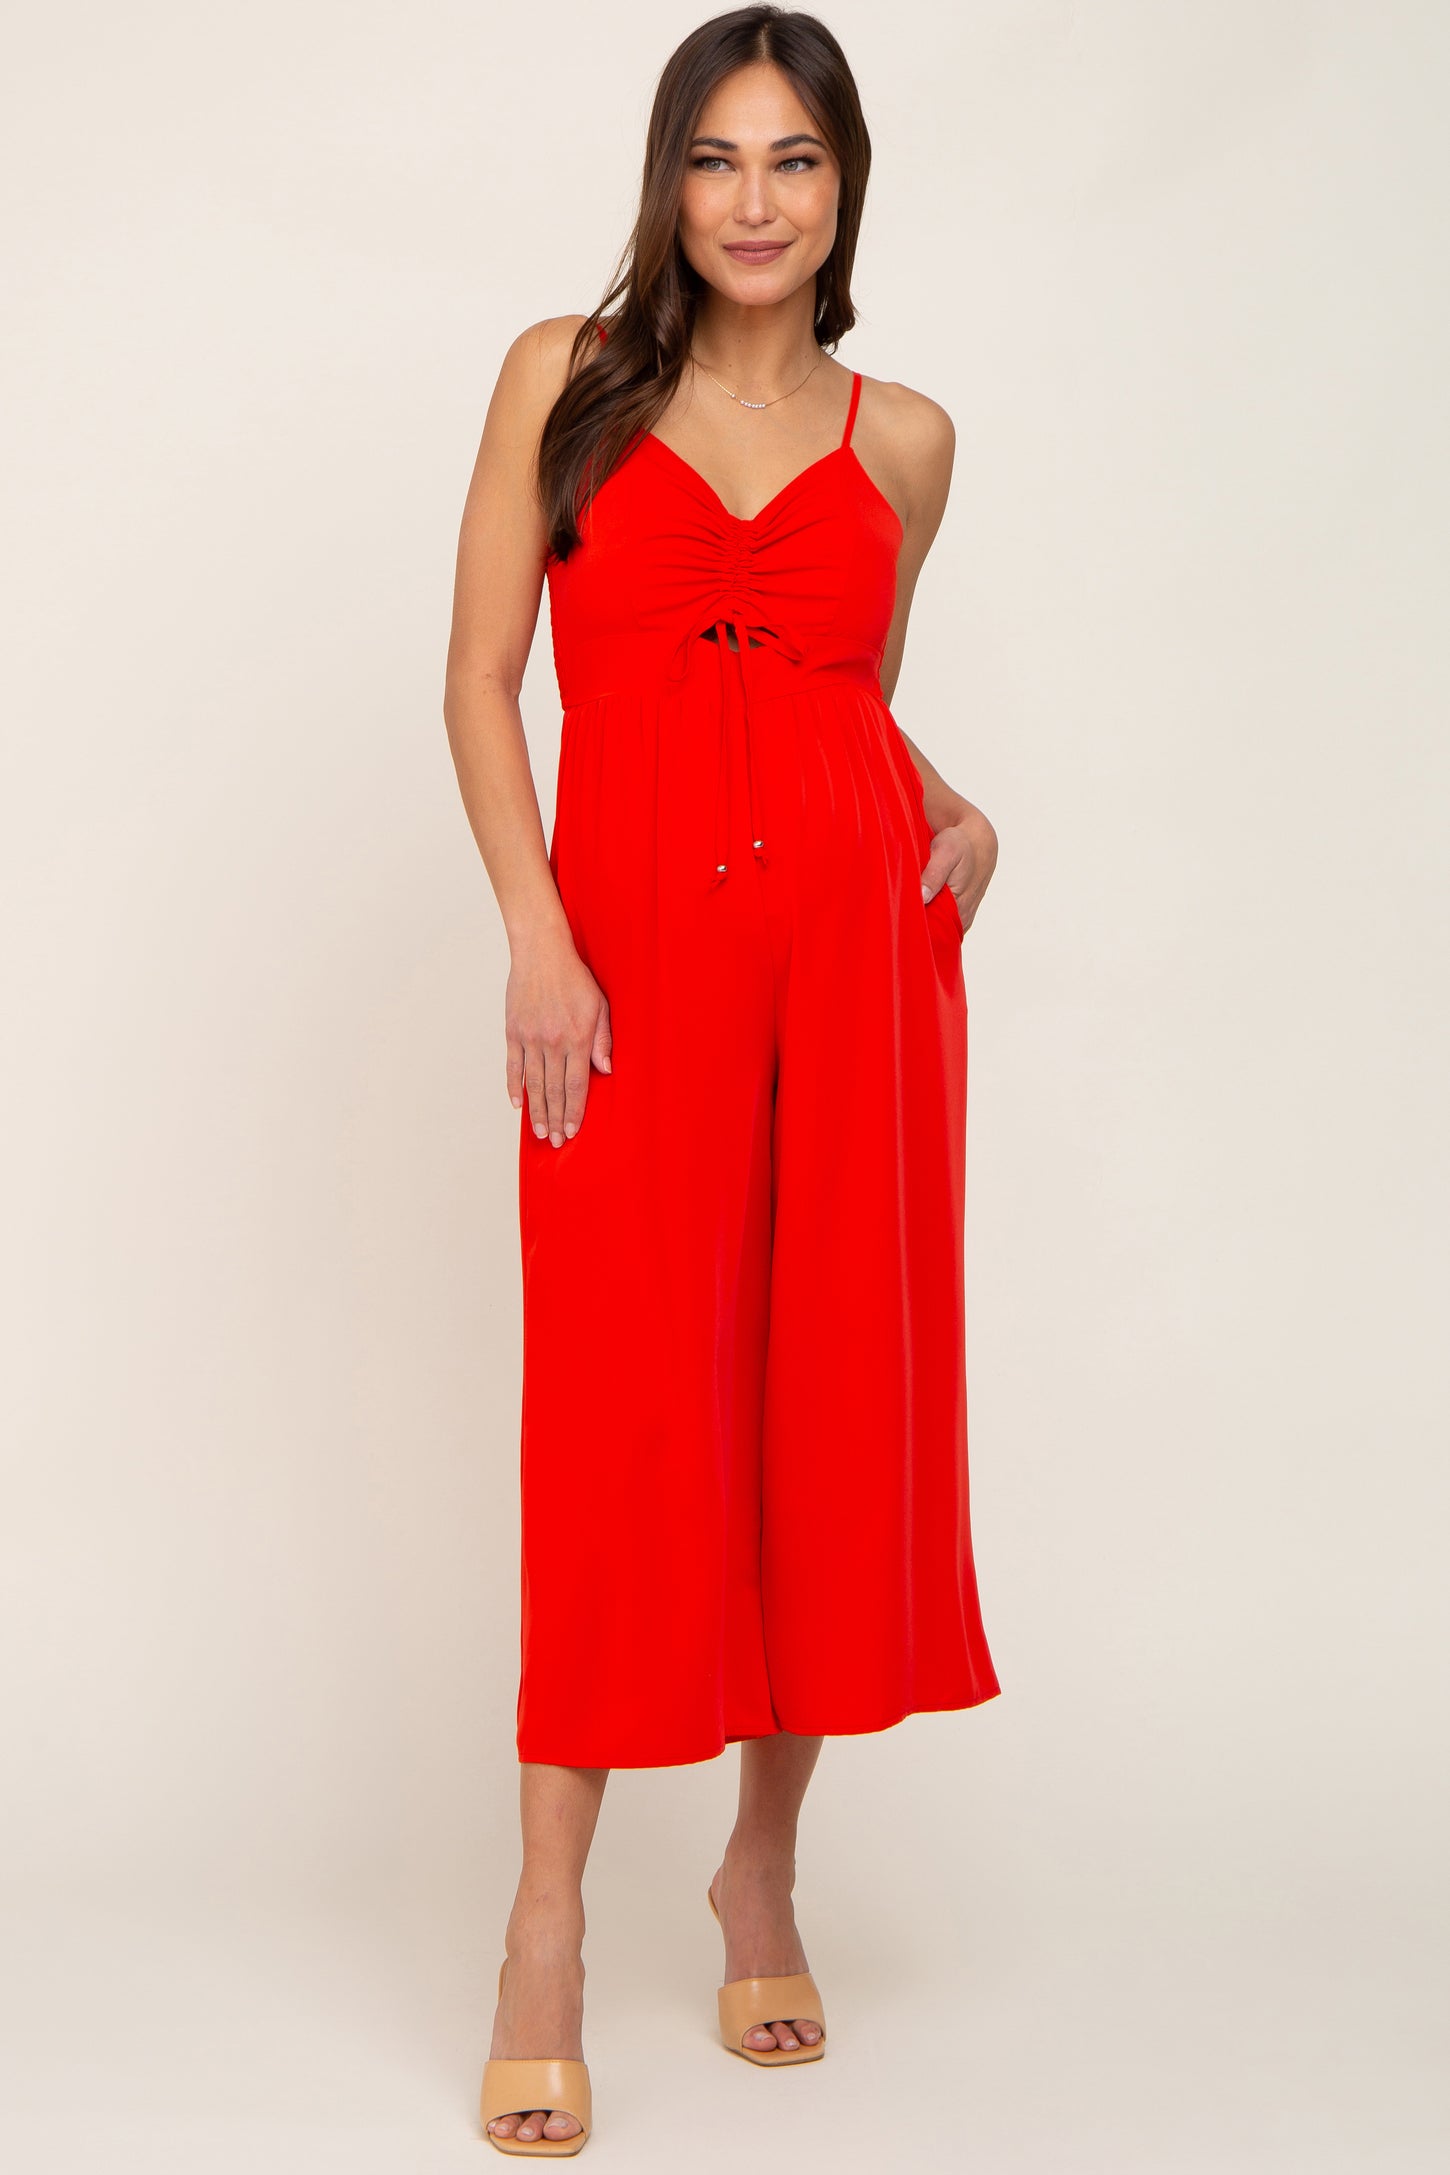 kayleigh | Pants & Jumpsuits | Kayleigh Rica Maternity Jumpsuit Red |  Poshmark